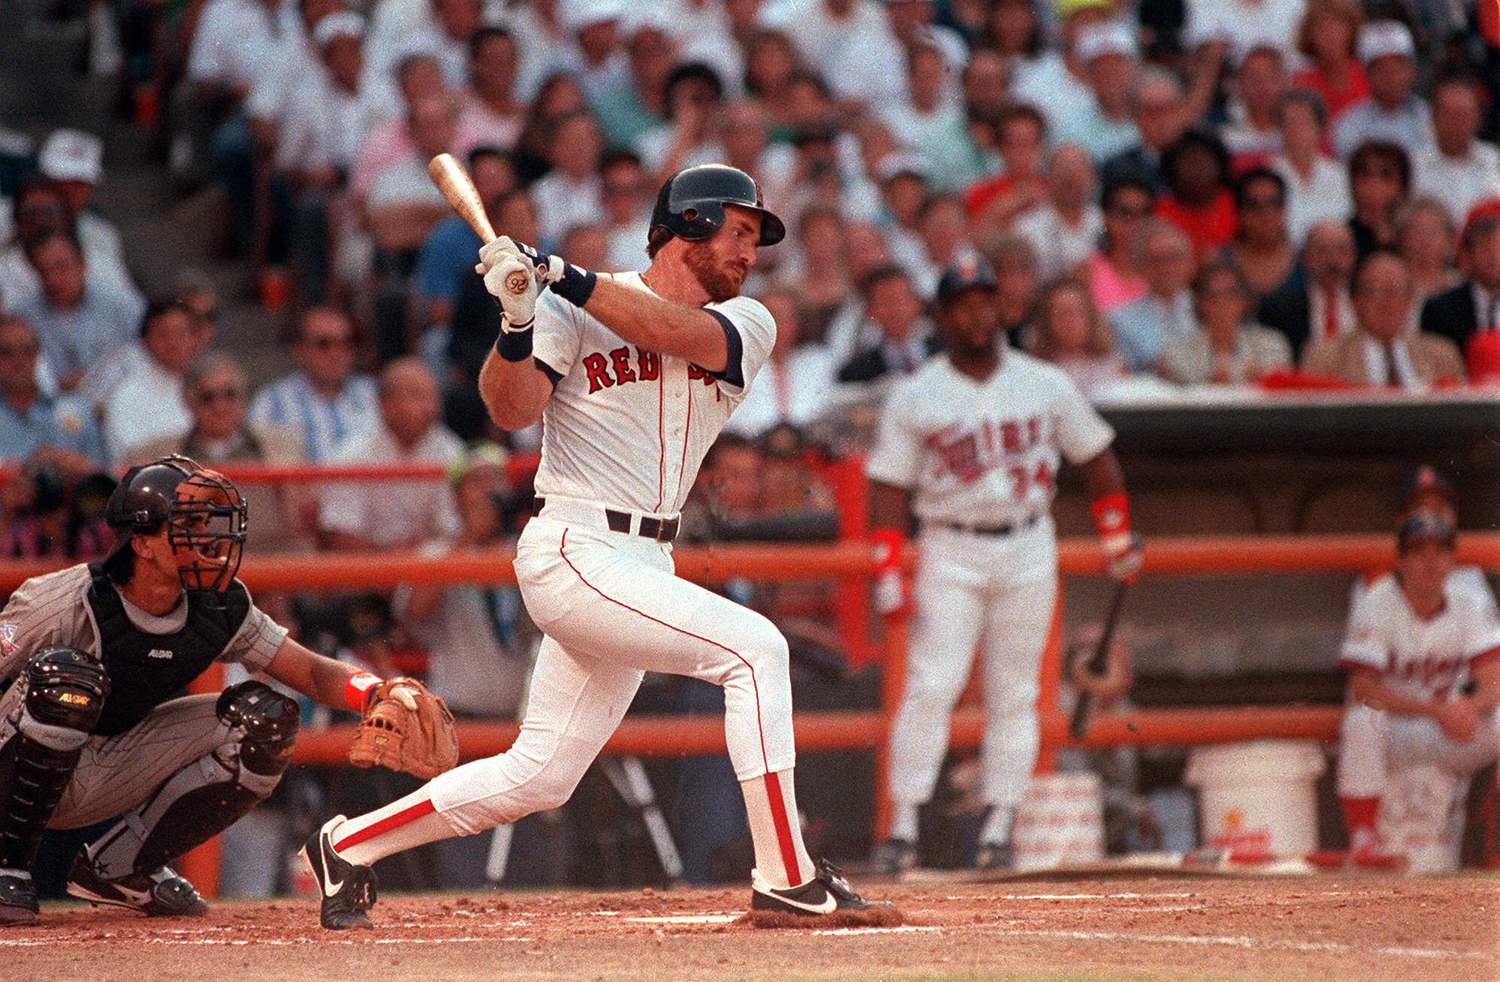 Wade Boggs, who played for the Boston Red Sox, New York Yankees